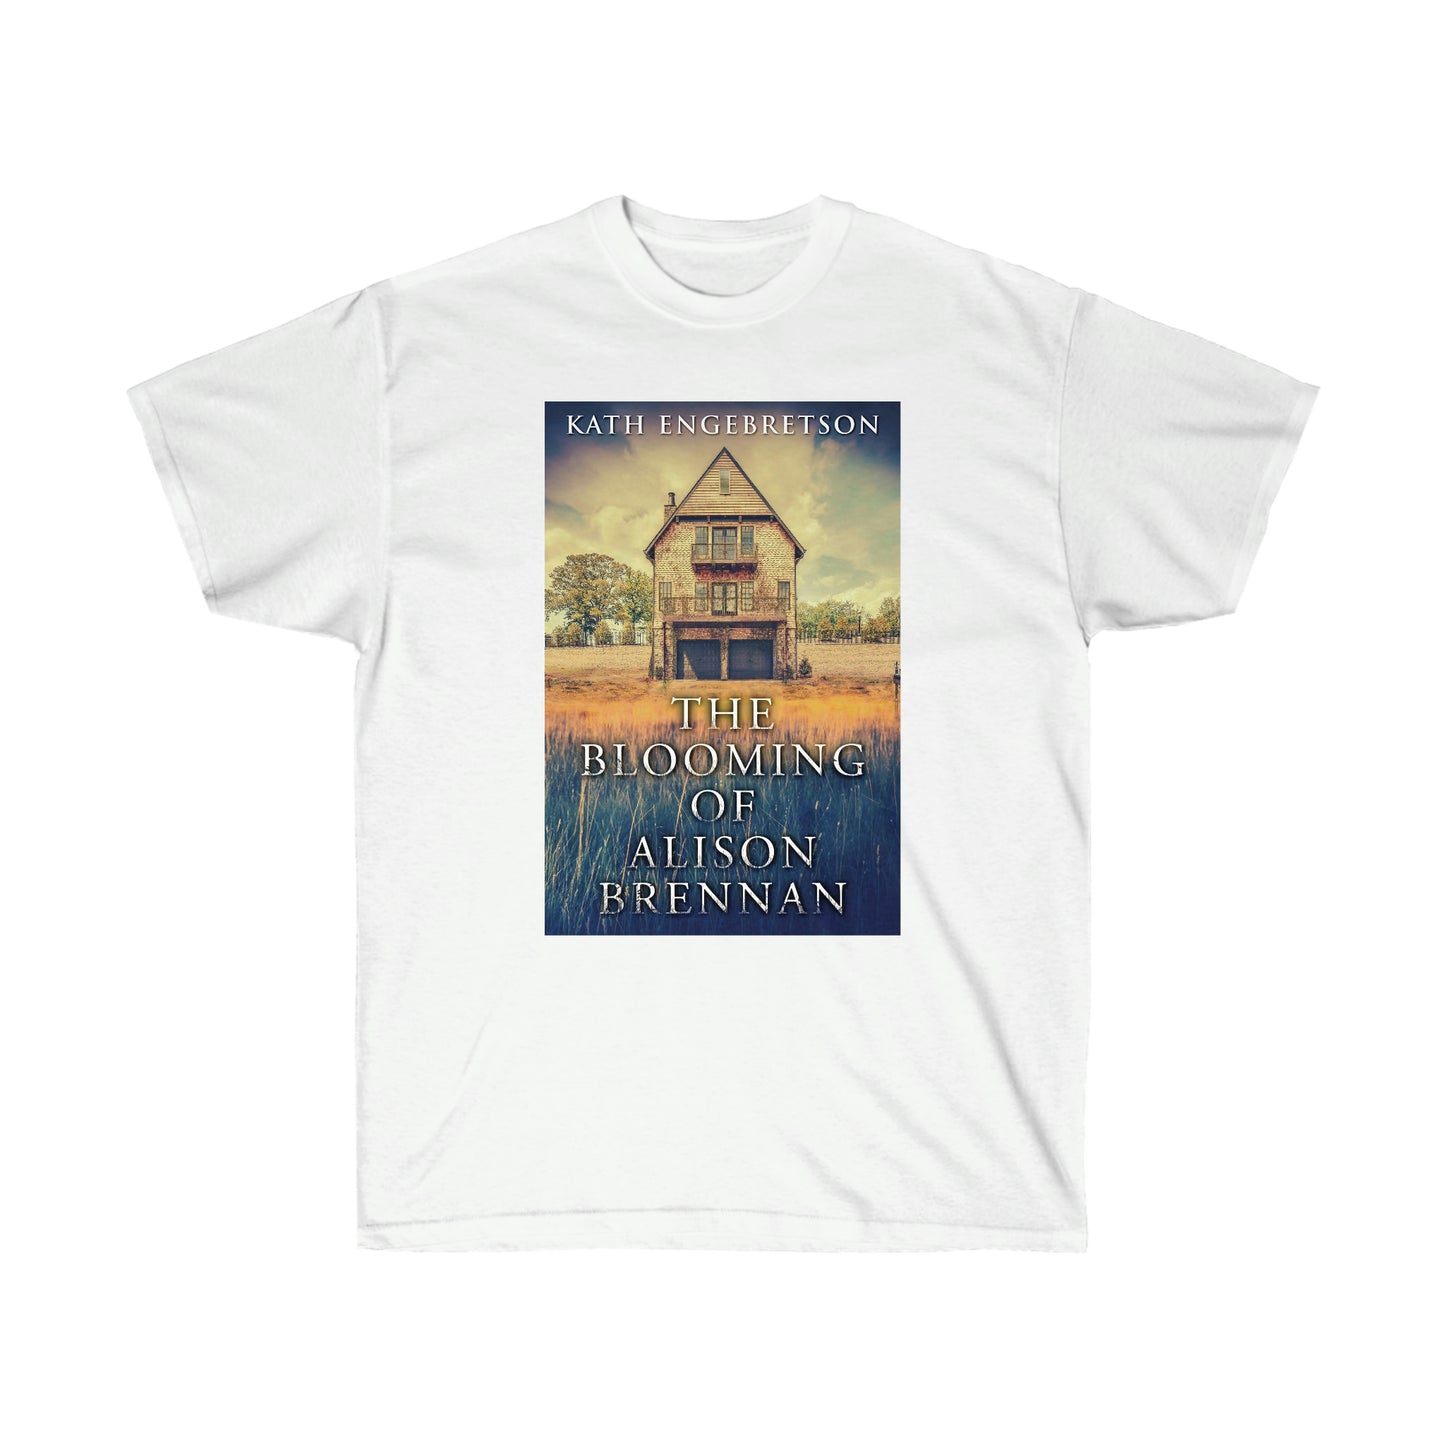 The Blooming Of Alison Brennan - Unisex T-Shirt